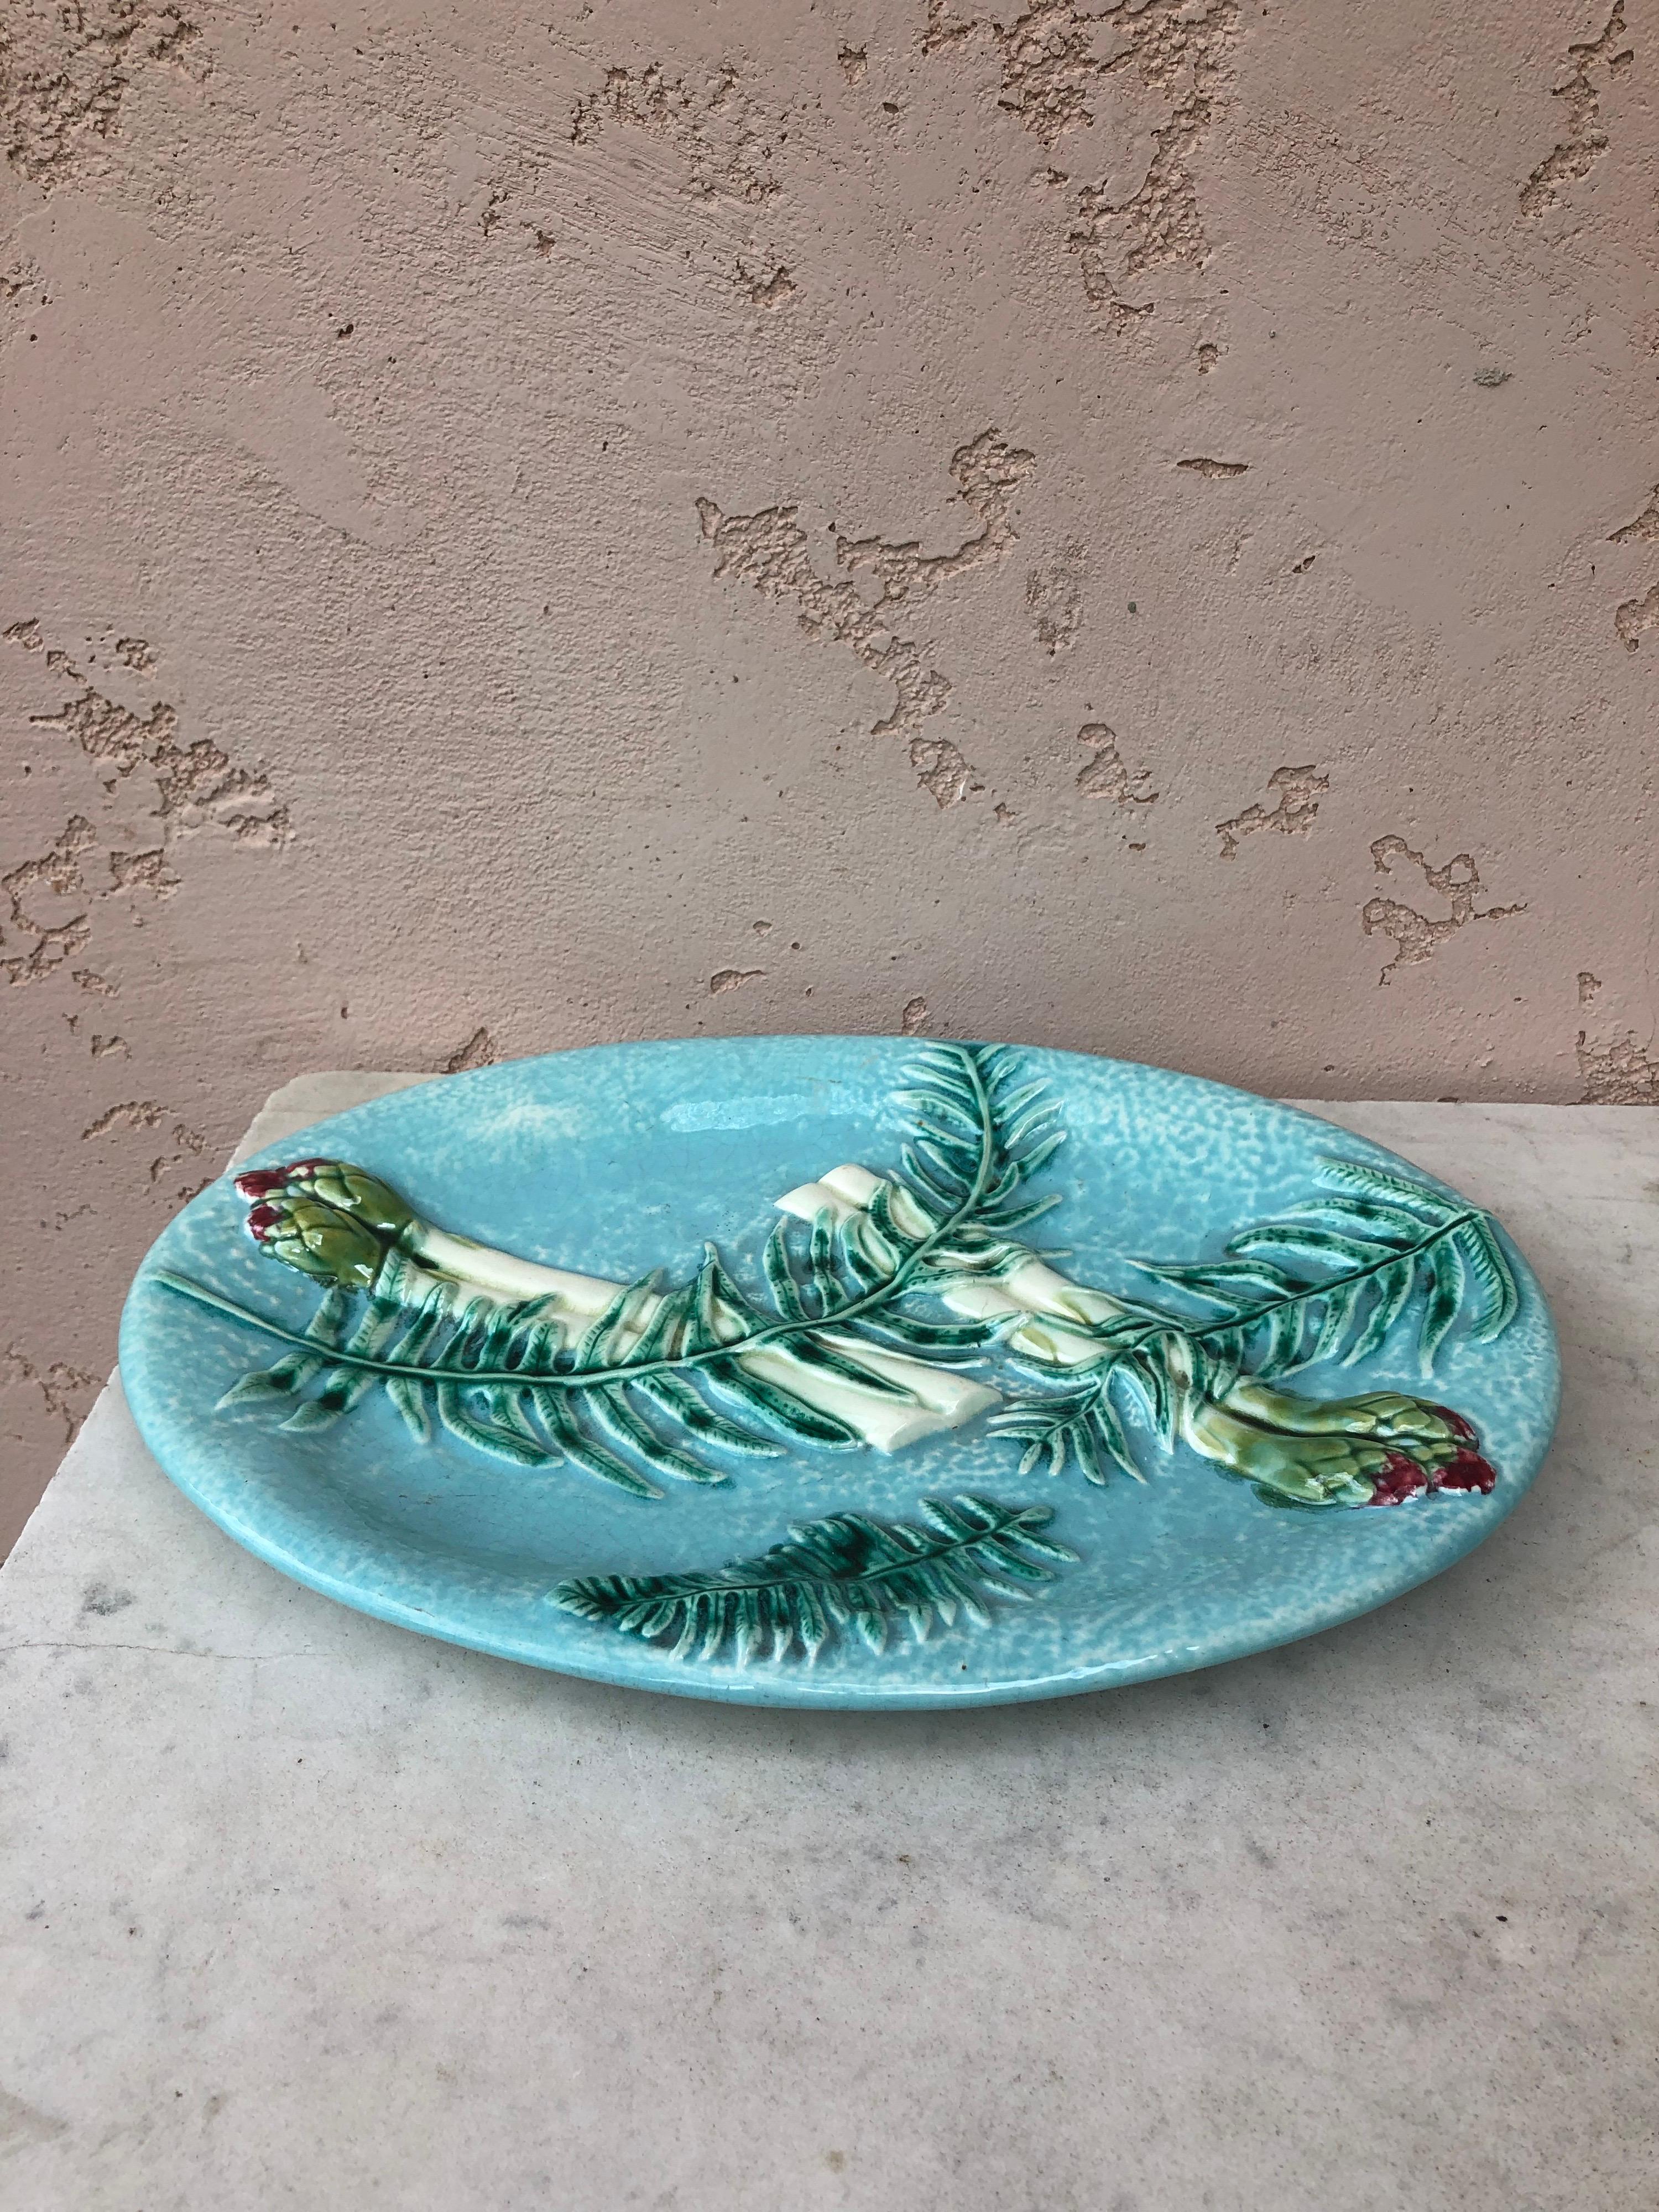 Rare Majolica Asparagus Platter with Fern Clairefontaine, circa 1880 For Sale 10